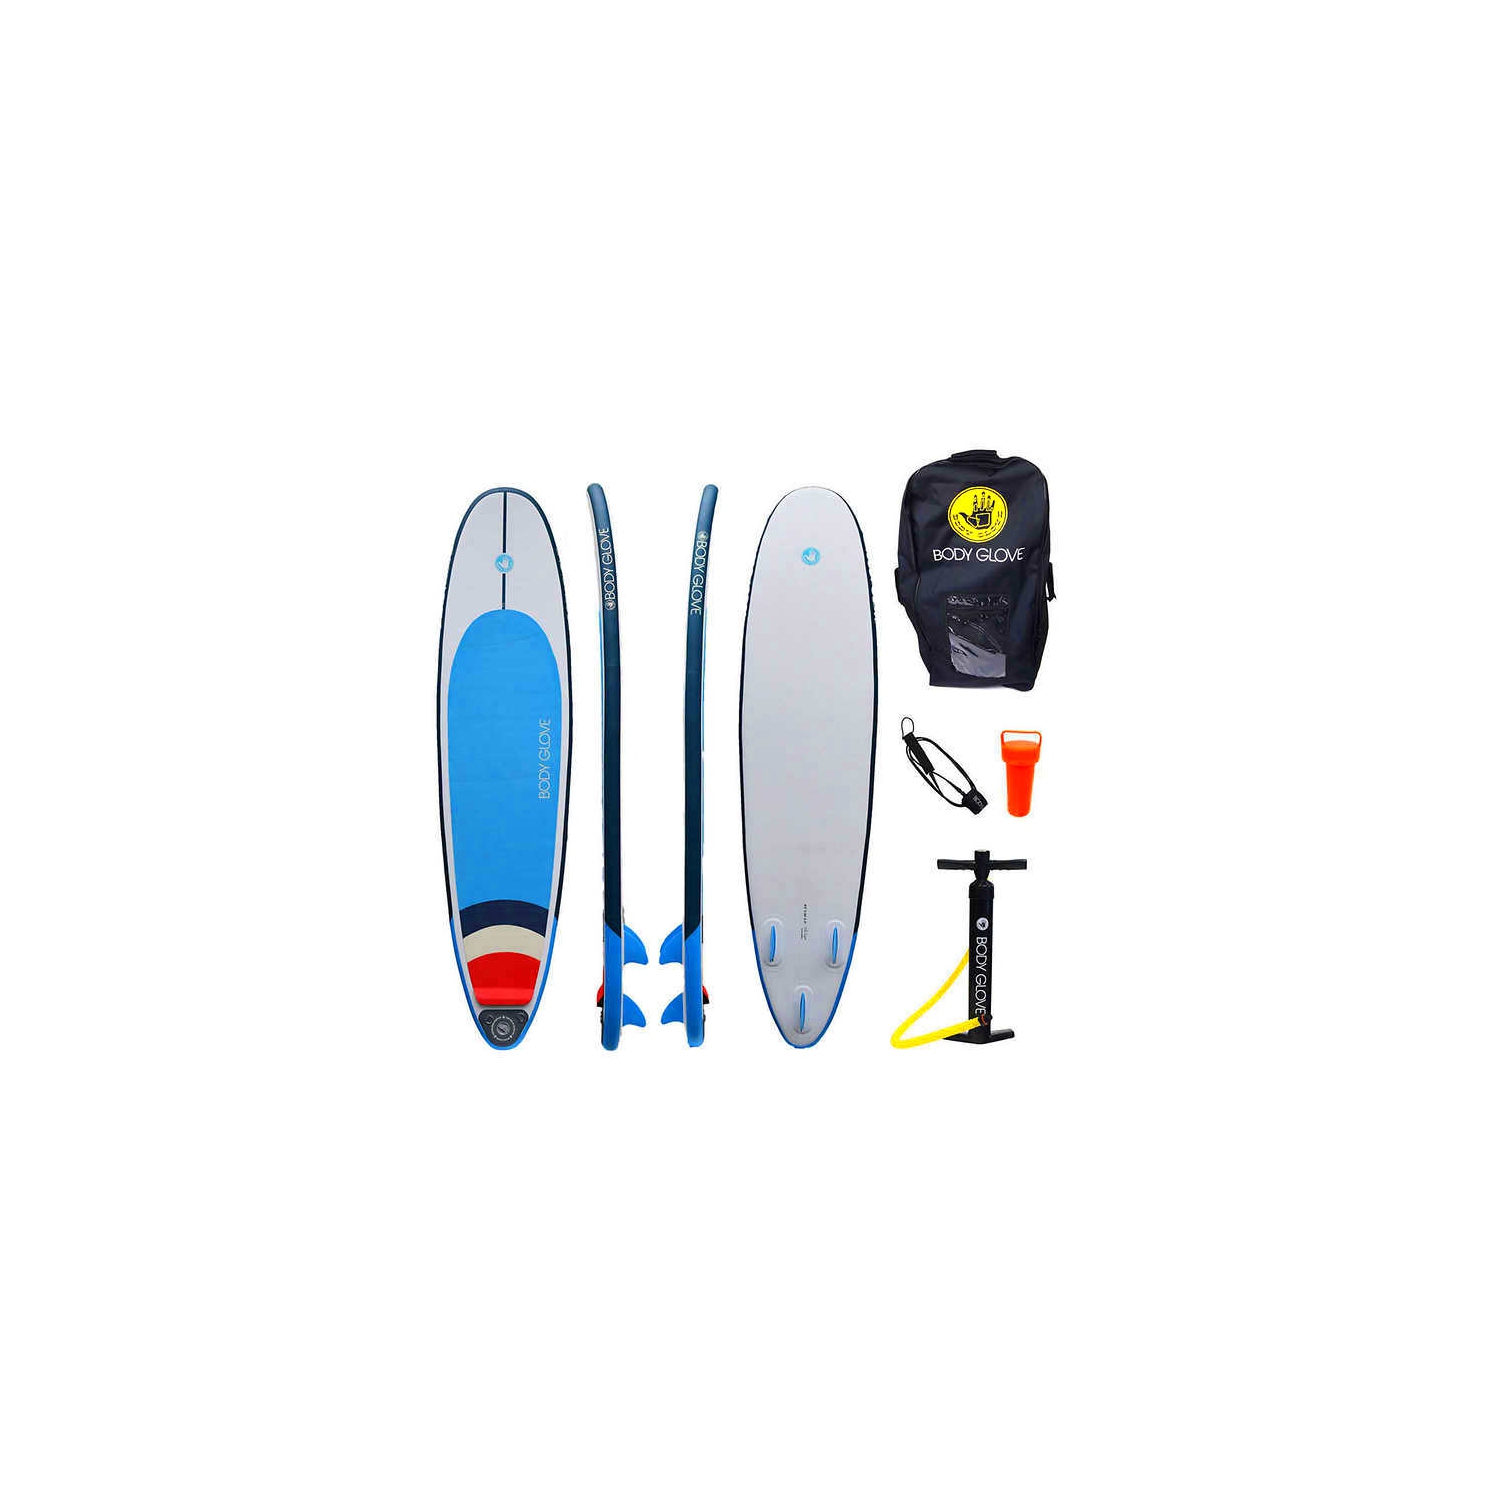 Body Glove EZ8 Surf Board Inflatable Surfboard, New In Box 20 PSI Red White  Blue - International Society of Hypertension